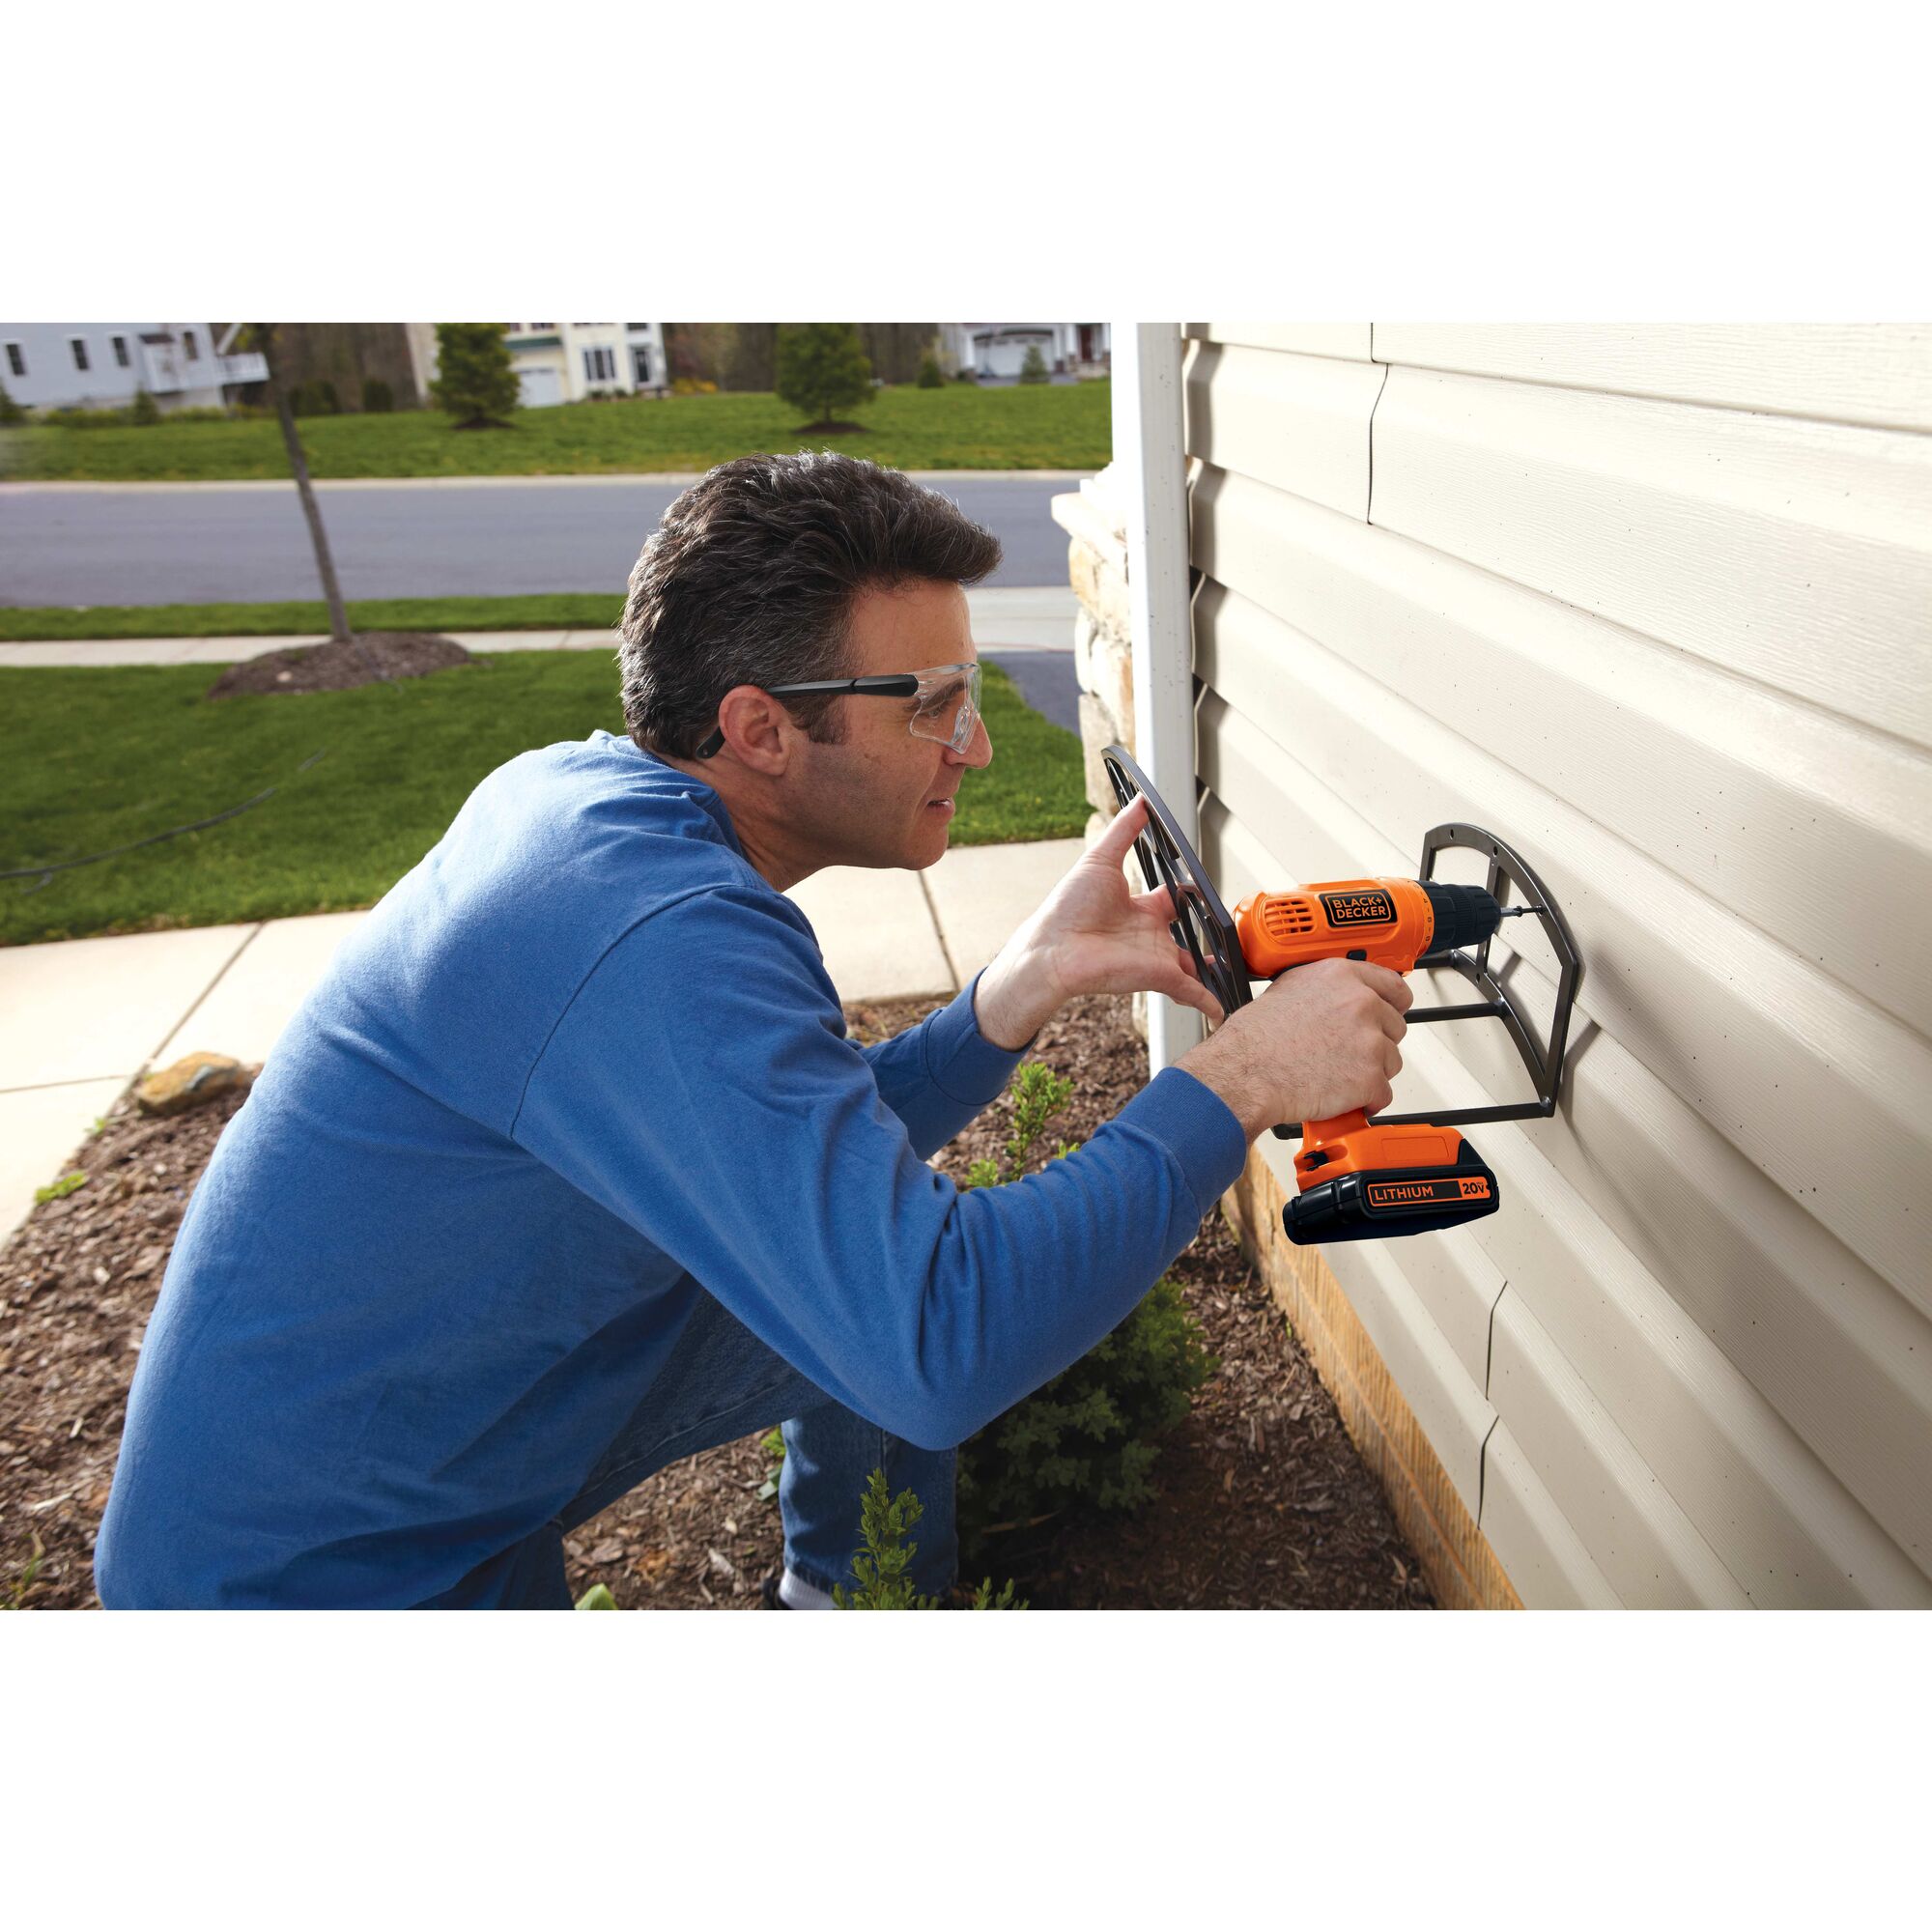 Lithium drill and driver with 30 accessories being used by a person to drill into the exterior of a house.